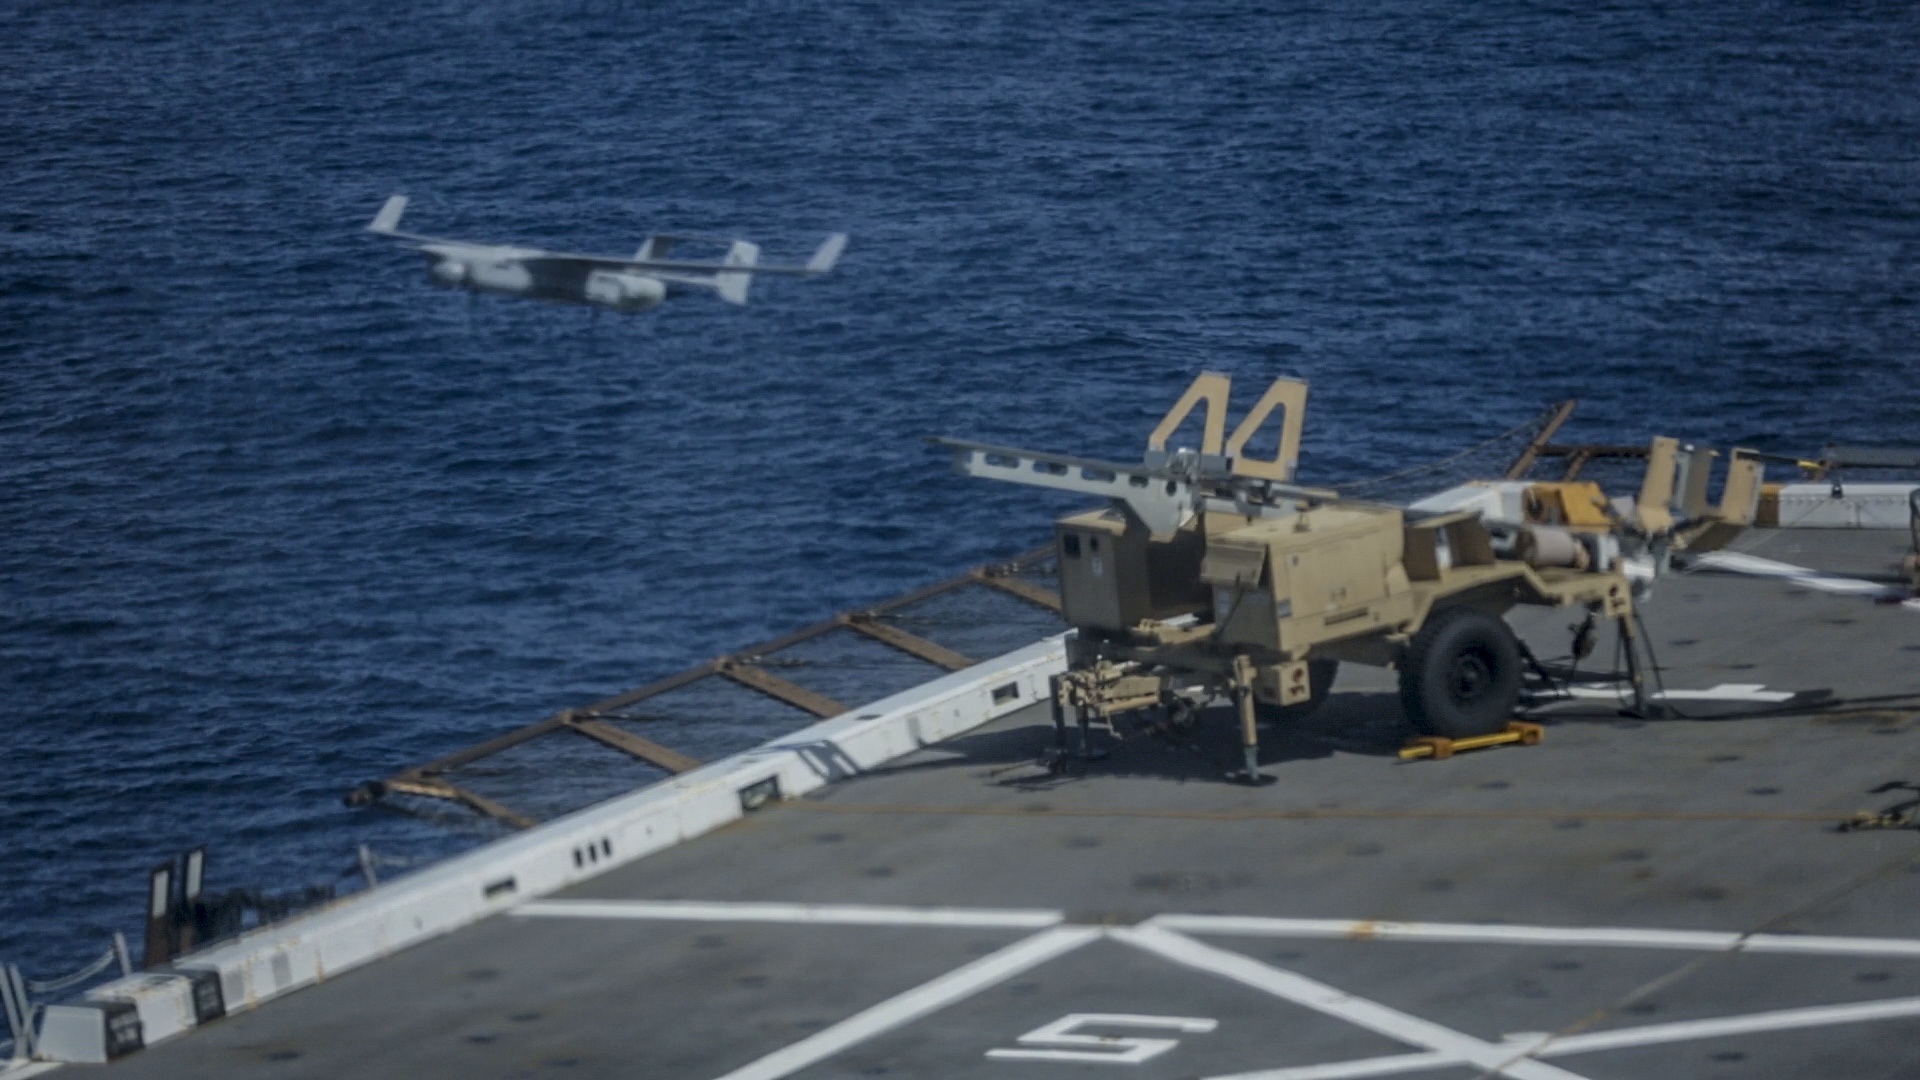 A drone takes off from a US ship in 2015.